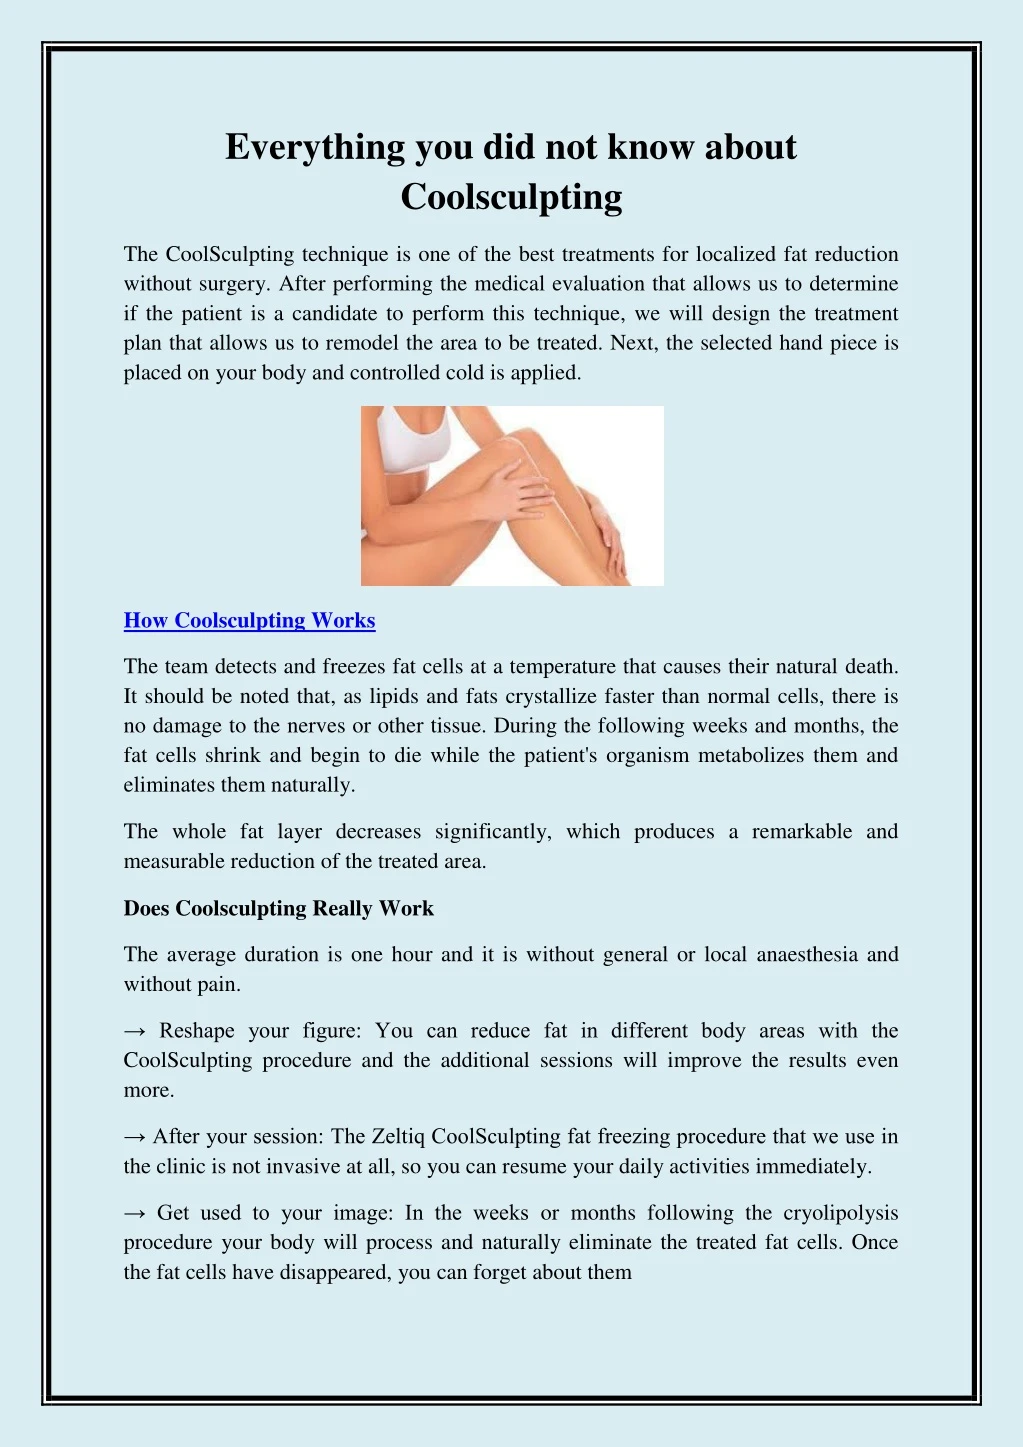 everything you did not know about coolsculpting